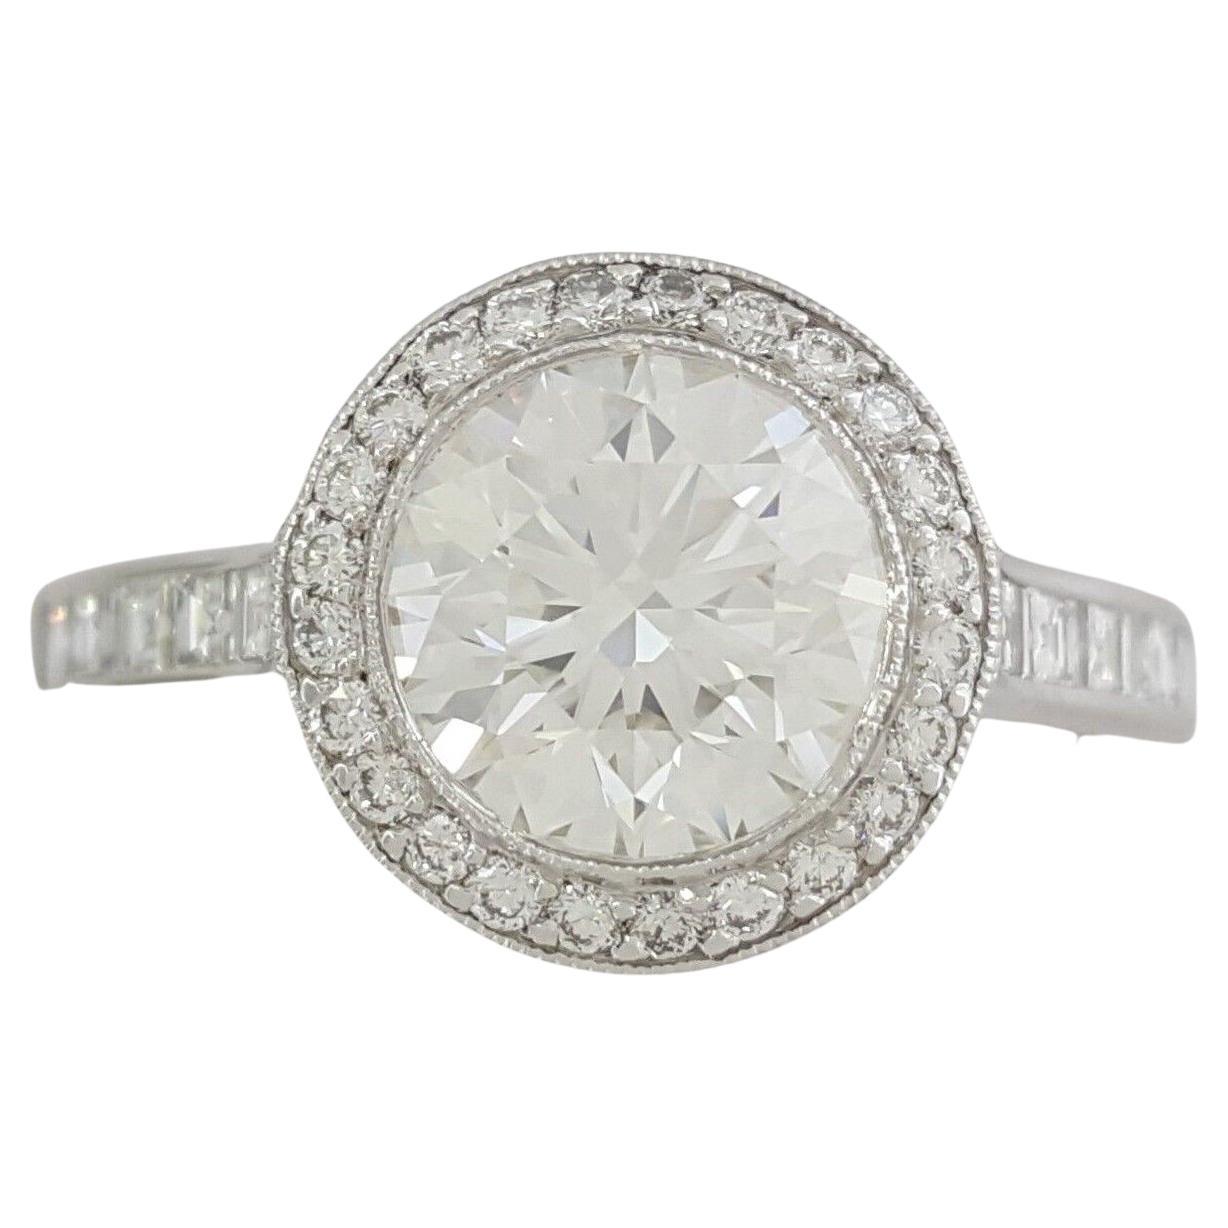 Tiffany & Co. Embrace 2.09 ct Total Weight Platinum Ideal Triple Excellent Round Brilliant Cut Diamond Halo Engagement Ring. 

The ring weighs 4.9 grams, size 7.5, the center stone is a Natural Round Brilliant Cut diamond weighing 1.54 ct, G in